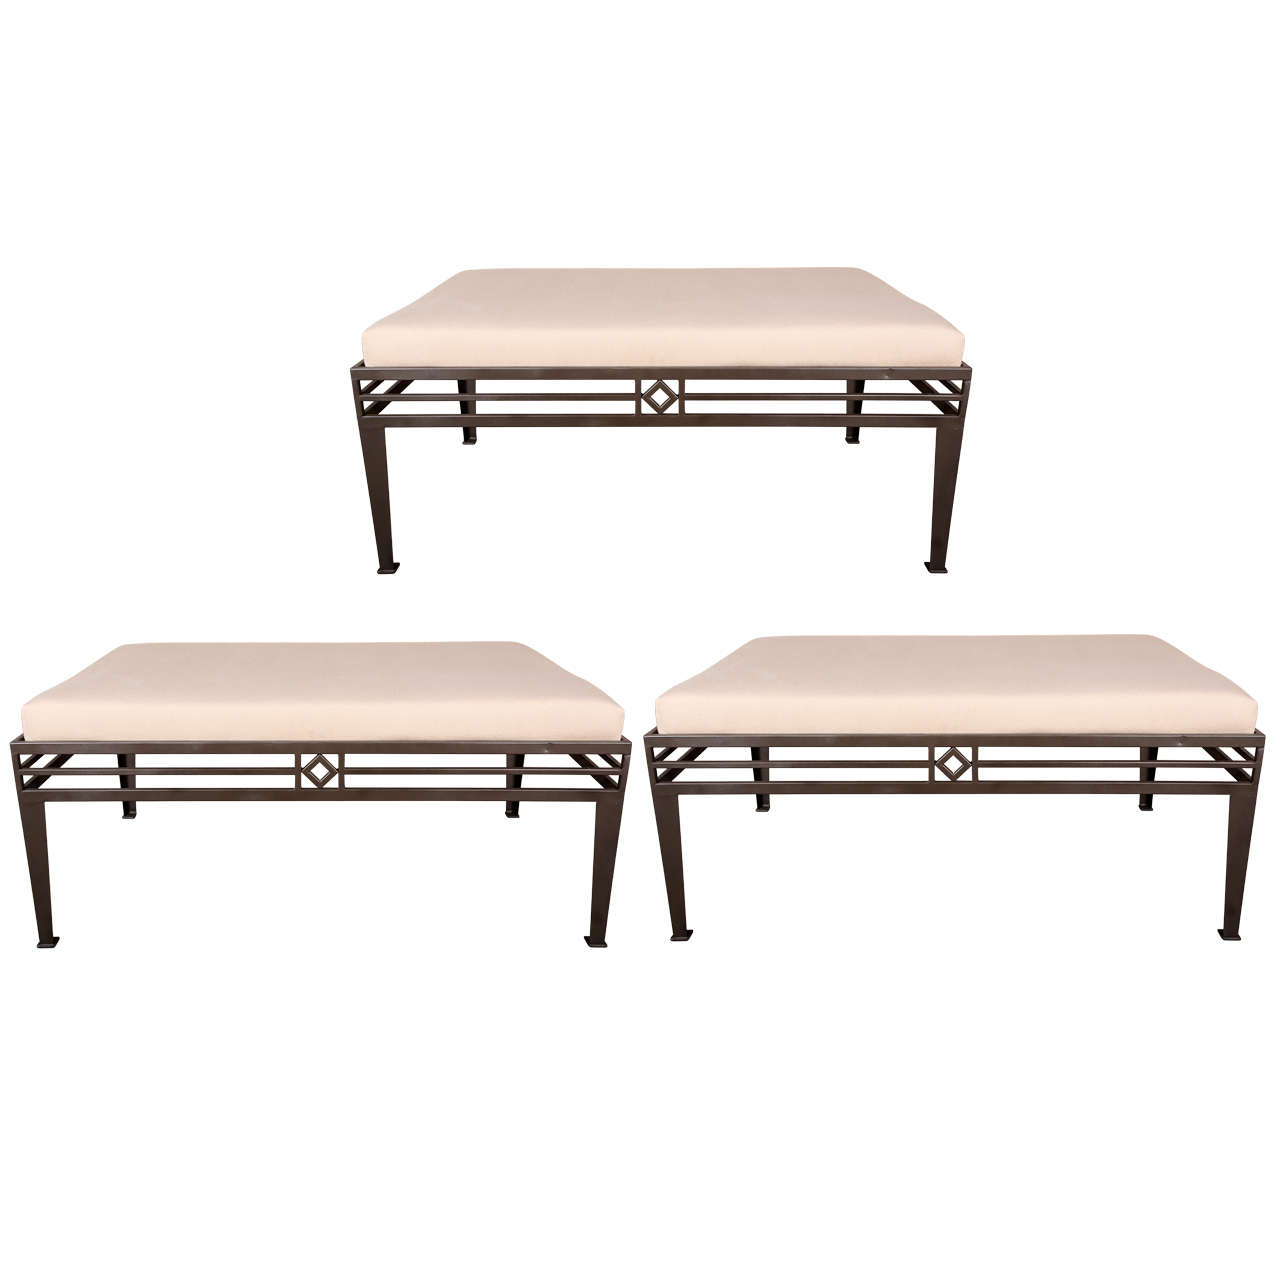 Set of 3 Large  Benches